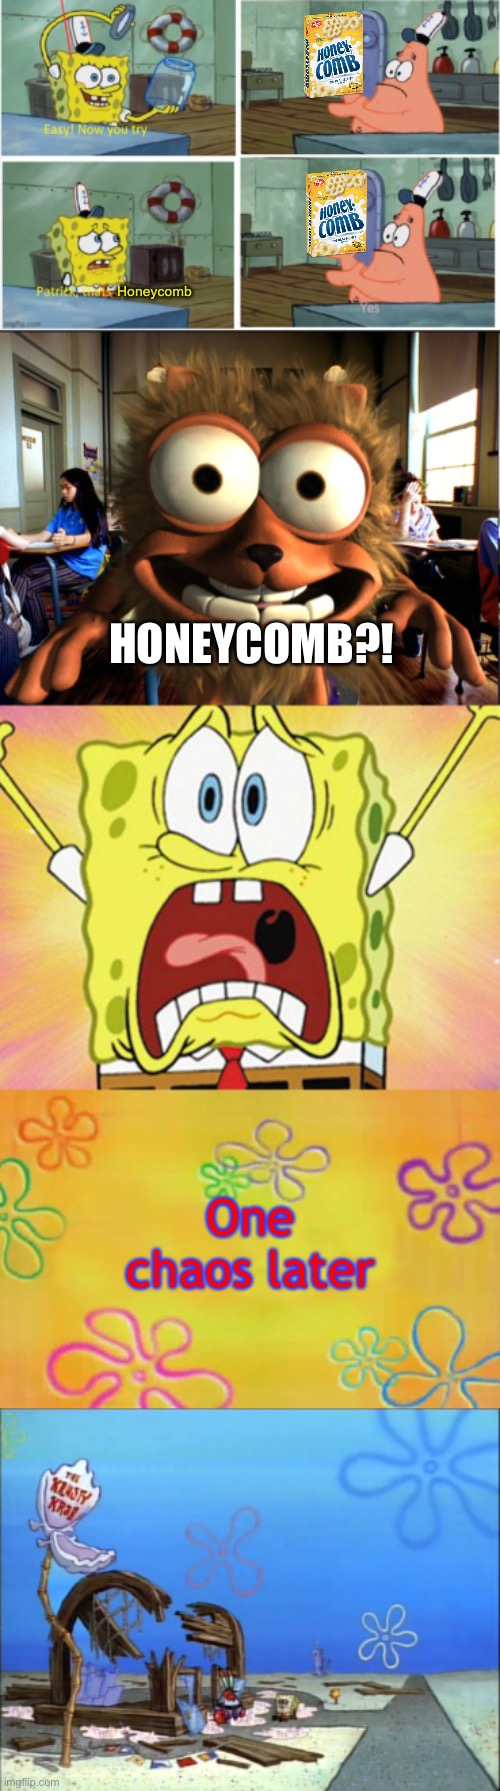 Patrick, get the jar! | Honeycomb; HONEYCOMB?! One chaos later | image tagged in patrick thats a,honeycomb,cereal,spongebob,honeycomb craver,memes | made w/ Imgflip meme maker